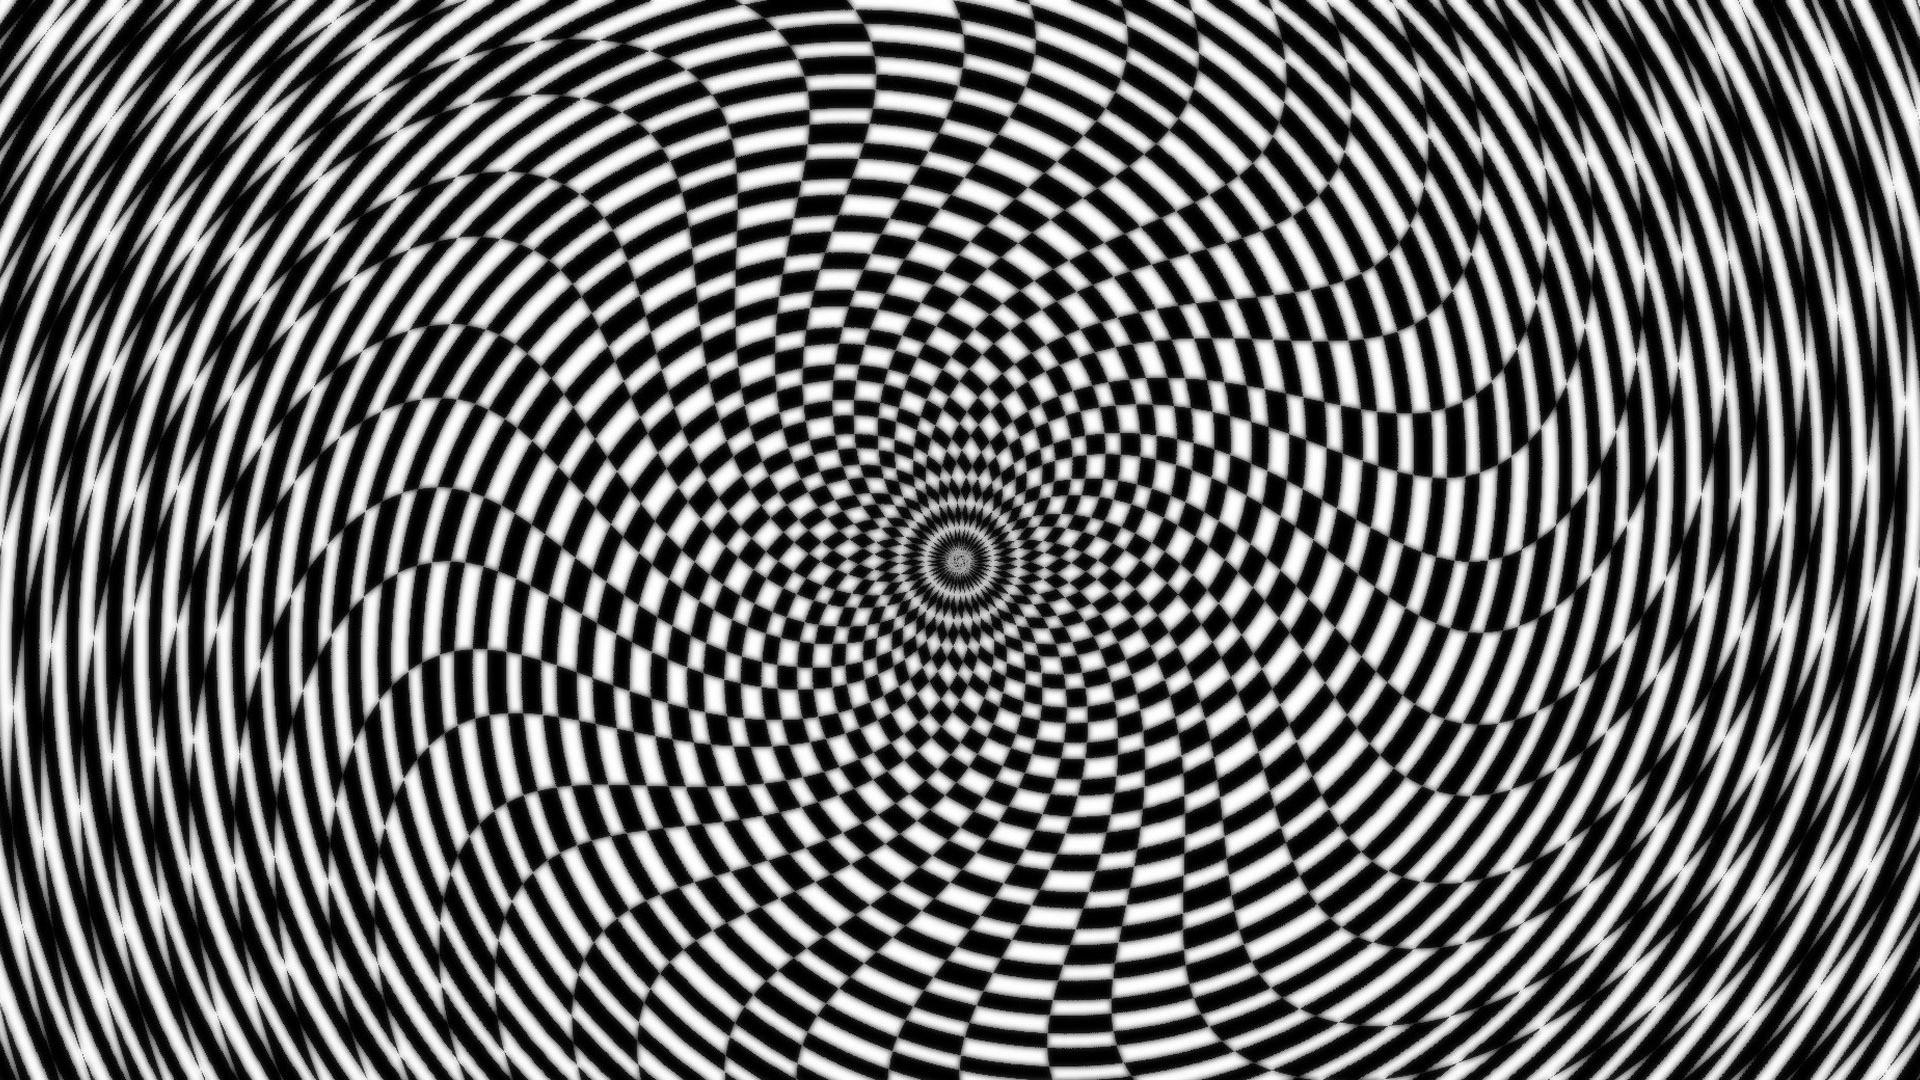 Free Optical Illusions HD Wallpaper Windows 10 Background 4k Free Download Wallpaper Hi Res Quality Image Cool Best 1920x1080